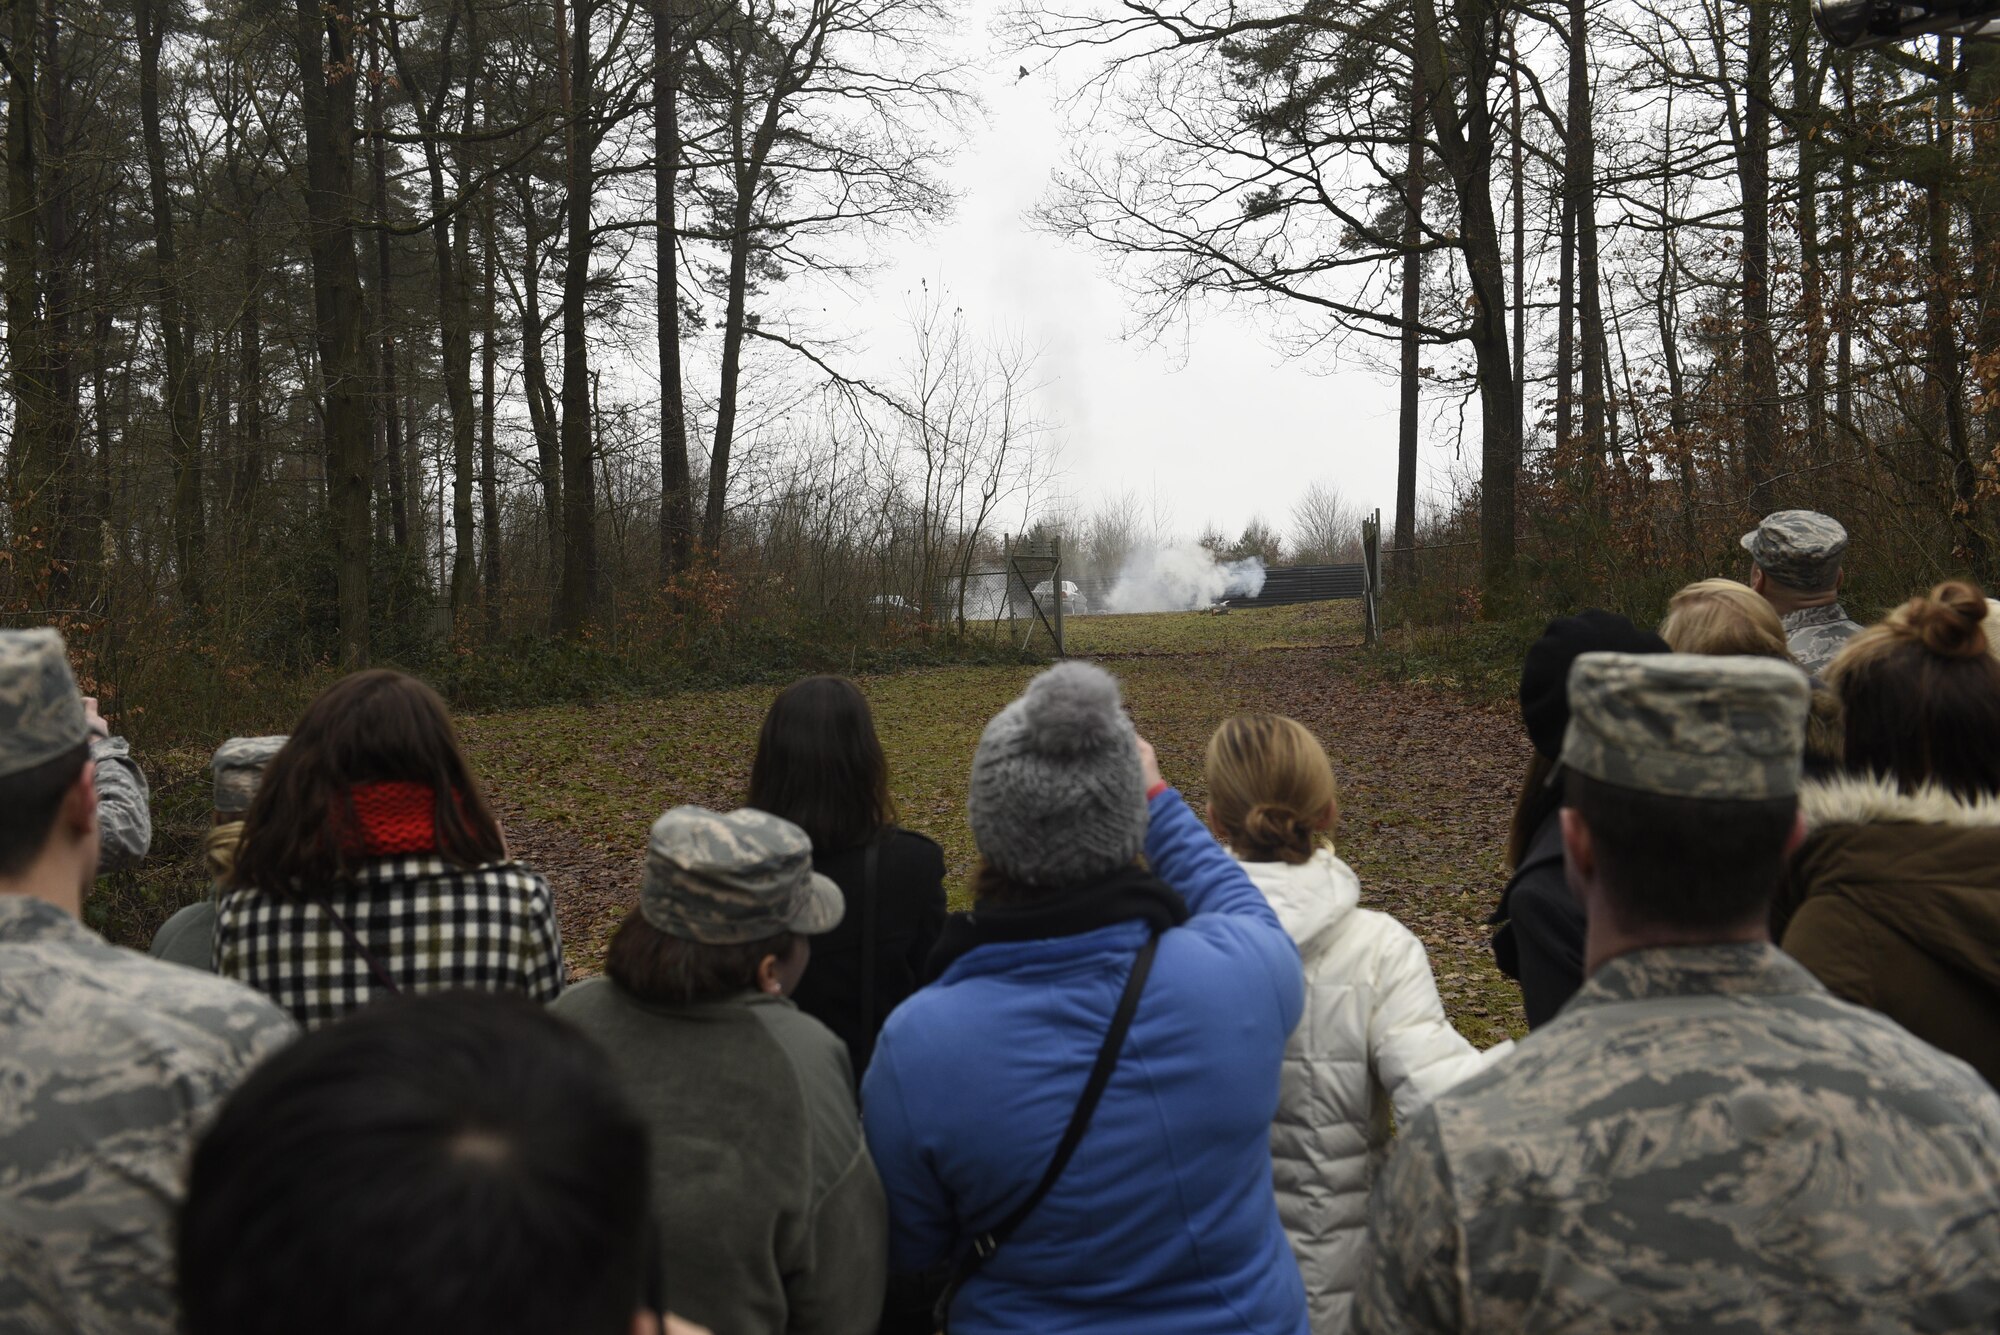 Annual award nominees watch a controlled detonation by Airmen of the 52nd Civil Engineer Squadron explosive ordnance disposal on Spangdahlem Air Base, Germany, Feb. 2, 2017. The nominees were given a base tour which included the fire department, military working dogs and EOD. (U.S. Air Force photo by Staff Sgt. Jonathan Snyder)